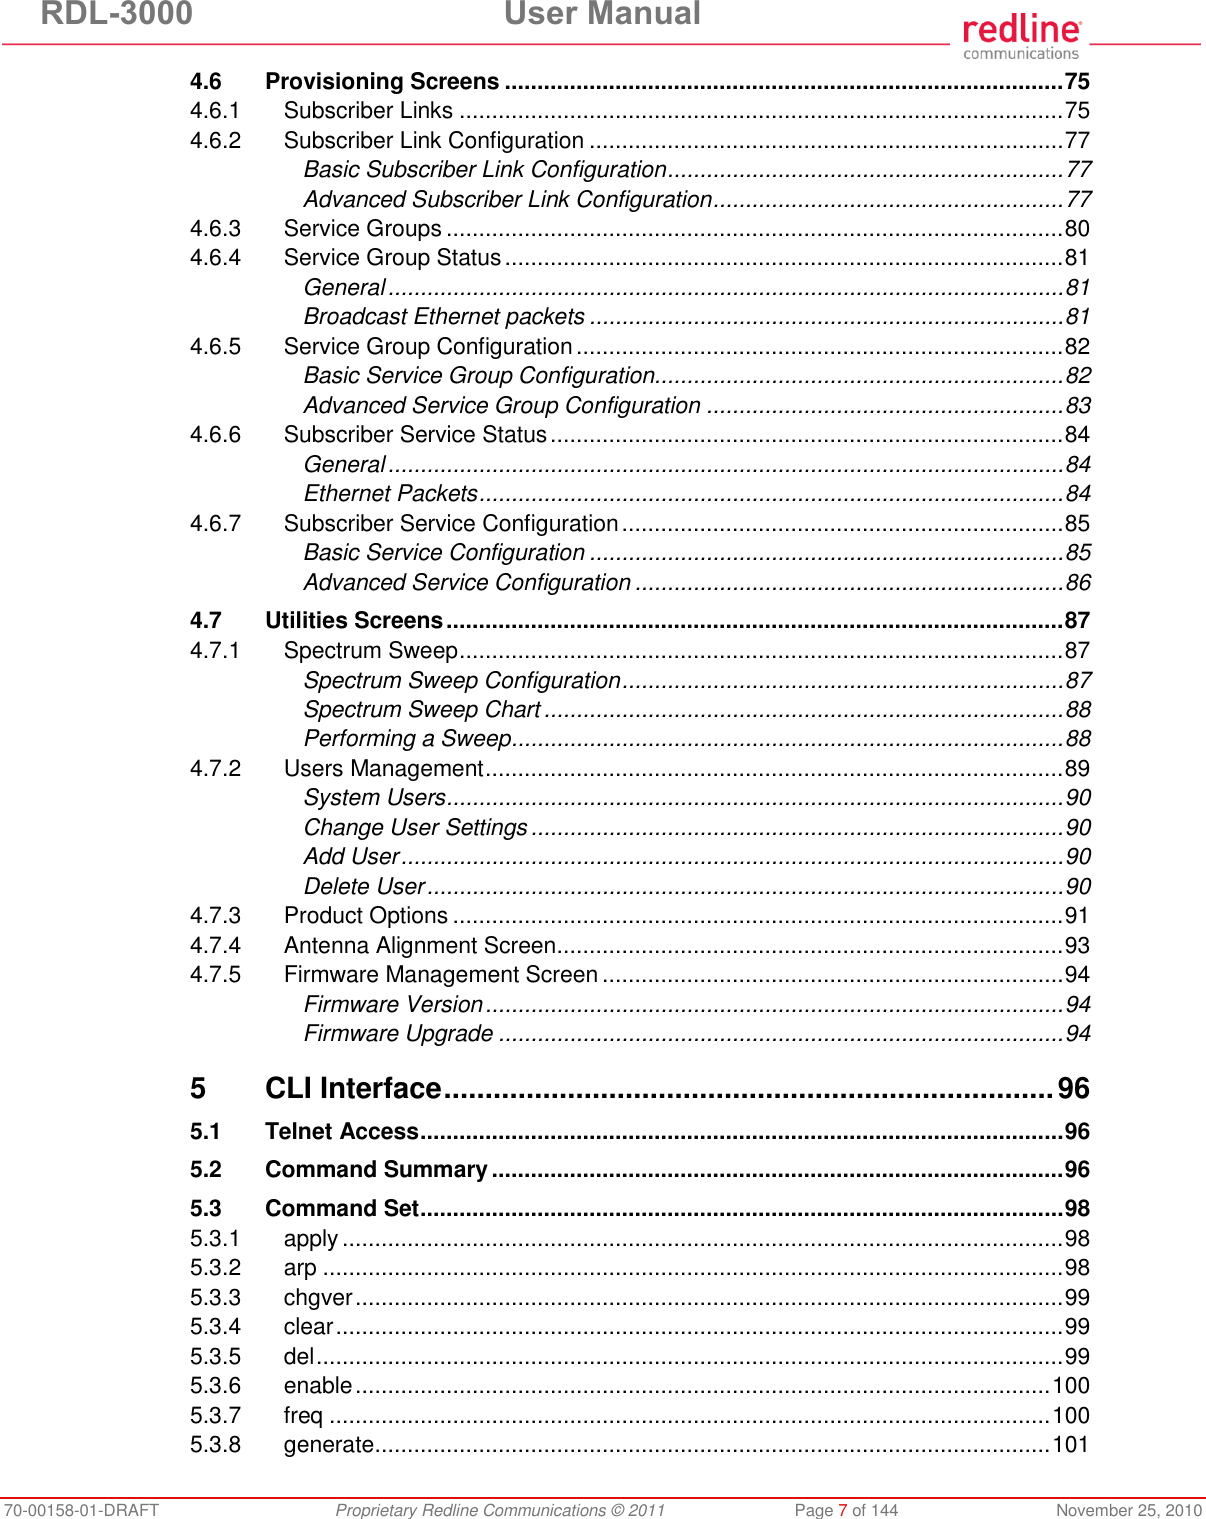 RDL-3000  User Manual 70-00158-01-DRAFT  Proprietary Redline Communications © 2011  Page 7 of 144  November 25, 2010 4.6 Provisioning Screens ...................................................................................... 75 4.6.1 Subscriber Links ............................................................................................. 75 4.6.2 Subscriber Link Configuration ......................................................................... 77 Basic Subscriber Link Configuration ............................................................. 77 Advanced Subscriber Link Configuration ...................................................... 77 4.6.3 Service Groups ............................................................................................... 80 4.6.4 Service Group Status ...................................................................................... 81 General ........................................................................................................ 81 Broadcast Ethernet packets ......................................................................... 81 4.6.5 Service Group Configuration ........................................................................... 82 Basic Service Group Configuration............................................................... 82 Advanced Service Group Configuration ....................................................... 83 4.6.6 Subscriber Service Status ............................................................................... 84 General ........................................................................................................ 84 Ethernet Packets .......................................................................................... 84 4.6.7 Subscriber Service Configuration .................................................................... 85 Basic Service Configuration ......................................................................... 85 Advanced Service Configuration .................................................................. 86 4.7 Utilities Screens ............................................................................................... 87 4.7.1 Spectrum Sweep ............................................................................................. 87 Spectrum Sweep Configuration .................................................................... 87 Spectrum Sweep Chart ................................................................................ 88 Performing a Sweep ..................................................................................... 88 4.7.2 Users Management ......................................................................................... 89 System Users ............................................................................................... 90 Change User Settings .................................................................................. 90 Add User ...................................................................................................... 90 Delete User .................................................................................................. 90 4.7.3 Product Options .............................................................................................. 91 4.7.4 Antenna Alignment Screen.............................................................................. 93 4.7.5 Firmware Management Screen ....................................................................... 94 Firmware Version ......................................................................................... 94 Firmware Upgrade ....................................................................................... 94 5 CLI Interface .......................................................................... 96 5.1 Telnet Access ................................................................................................... 96 5.2 Command Summary ........................................................................................ 96 5.3 Command Set ................................................................................................... 98 5.3.1 apply ............................................................................................................... 98 5.3.2 arp .................................................................................................................. 98 5.3.3 chgver ............................................................................................................. 99 5.3.4 clear ................................................................................................................ 99 5.3.5 del ................................................................................................................... 99 5.3.6 enable ........................................................................................................... 100 5.3.7 freq ............................................................................................................... 100 5.3.8 generate ........................................................................................................ 101 